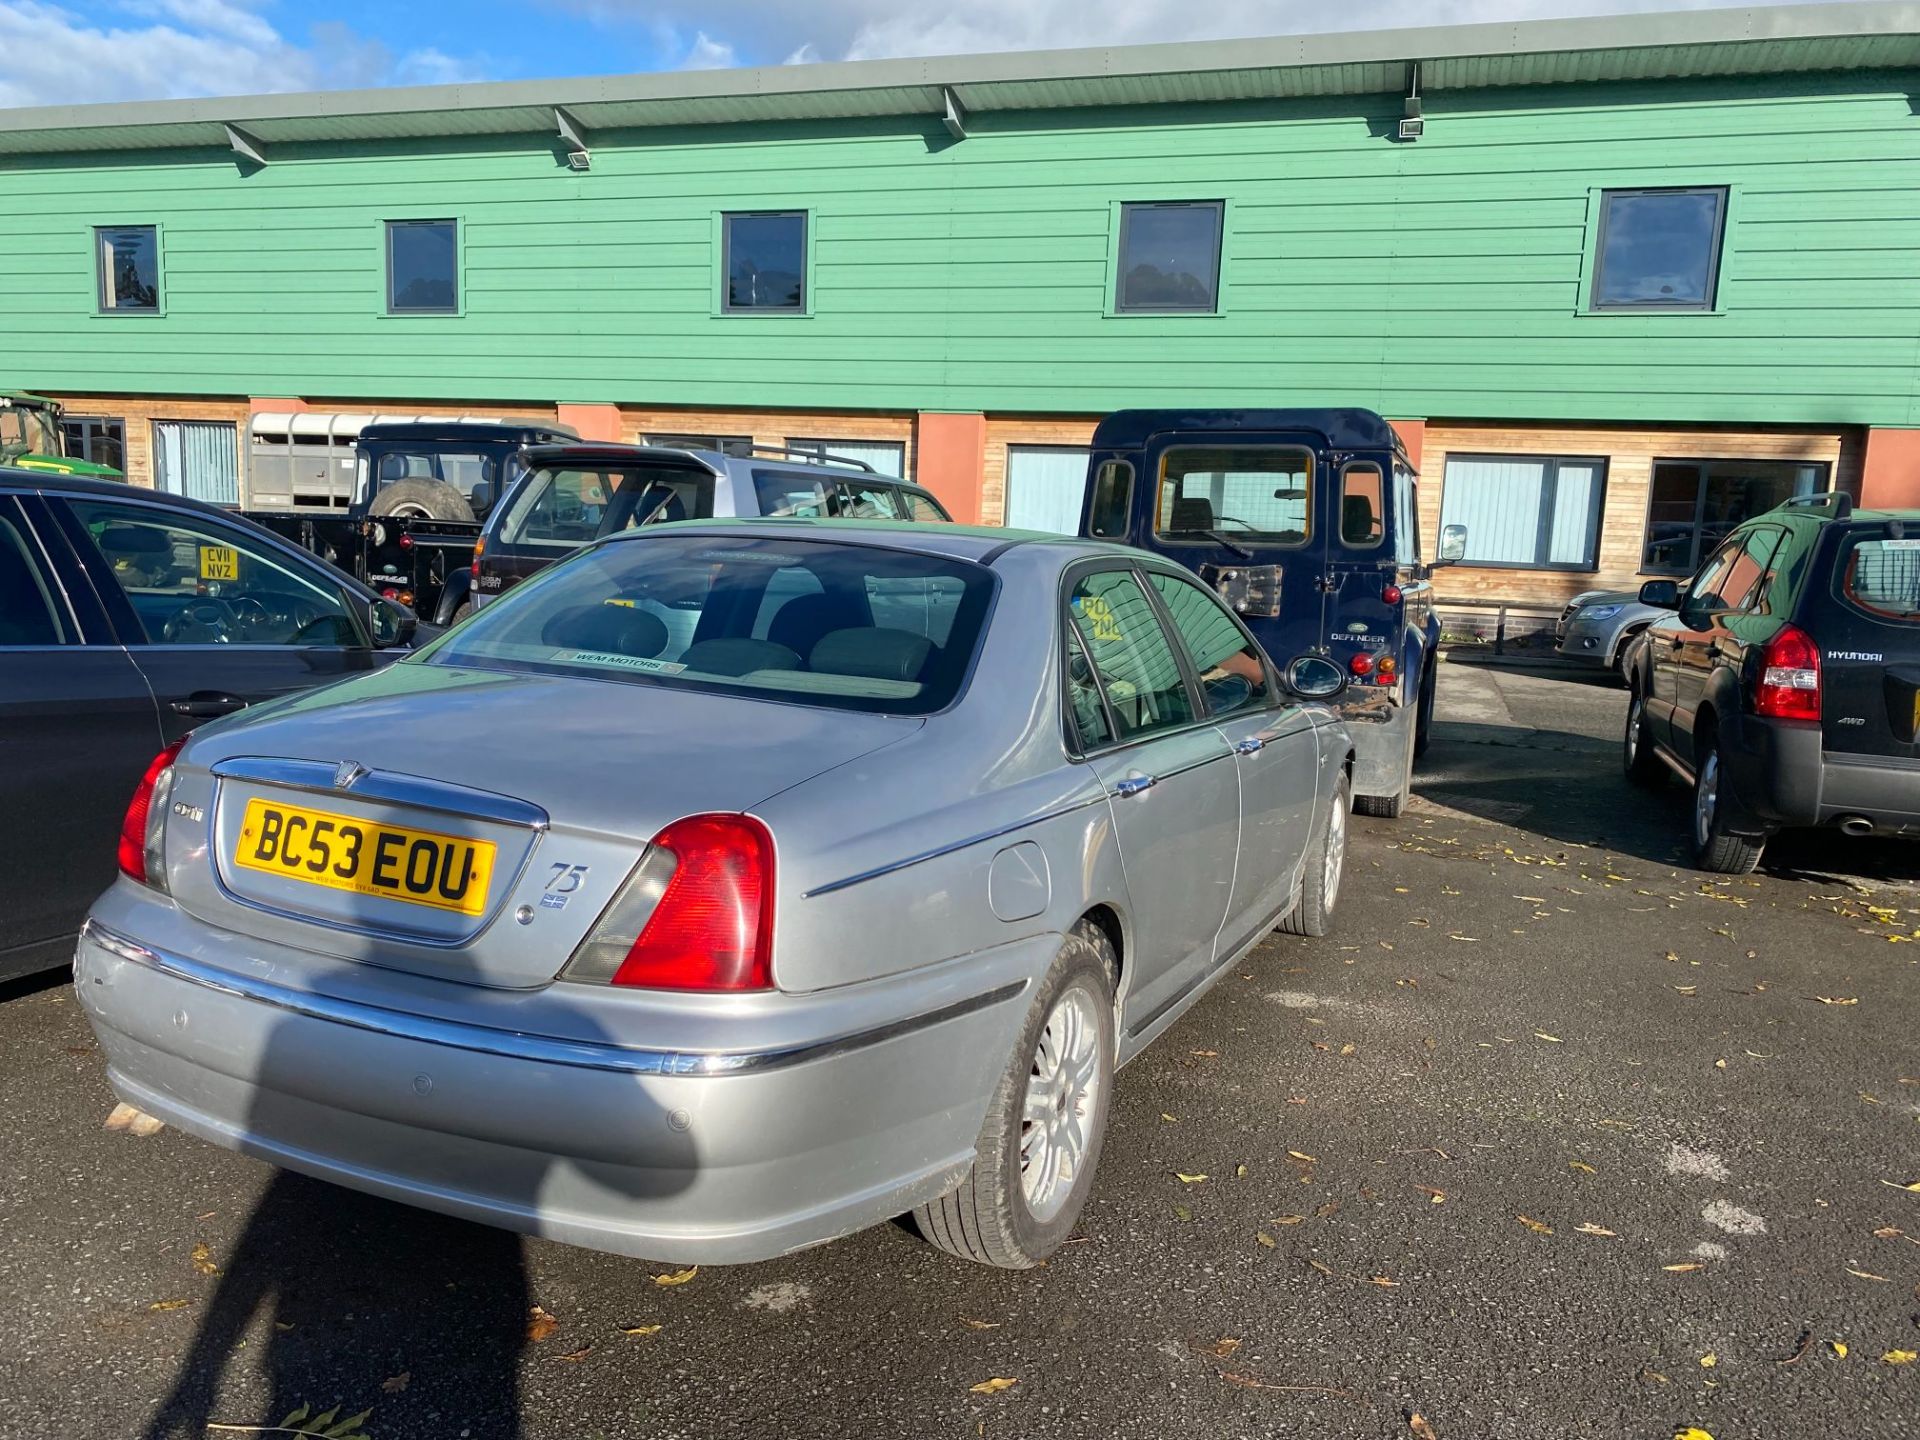 ROVER 75 BC53 EOU - Image 2 of 3